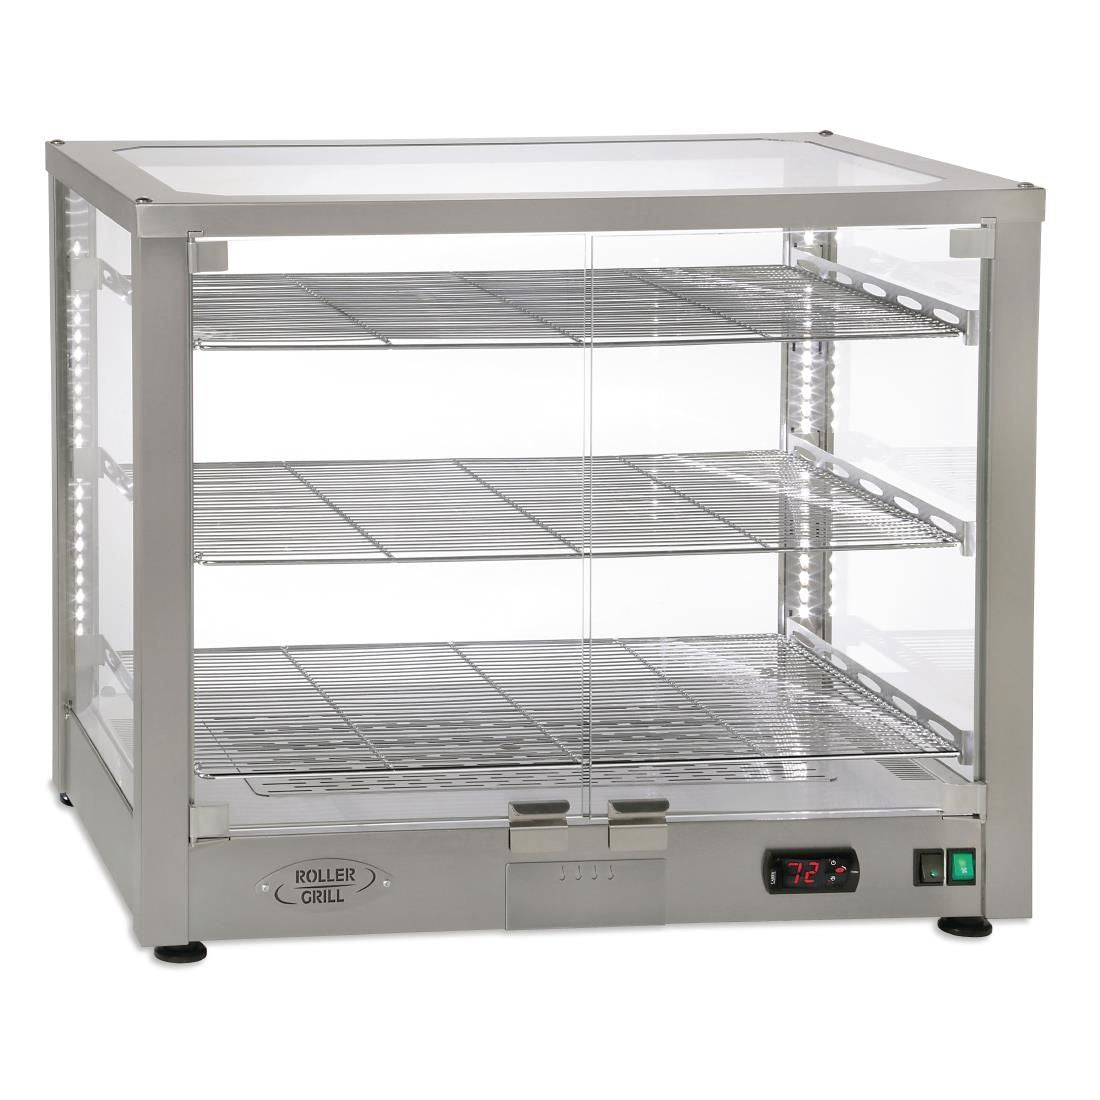 DF412 Roller Grill Heated 3 Shelf Display Cabinet WD780 DI JD Catering Equipment Solutions Ltd